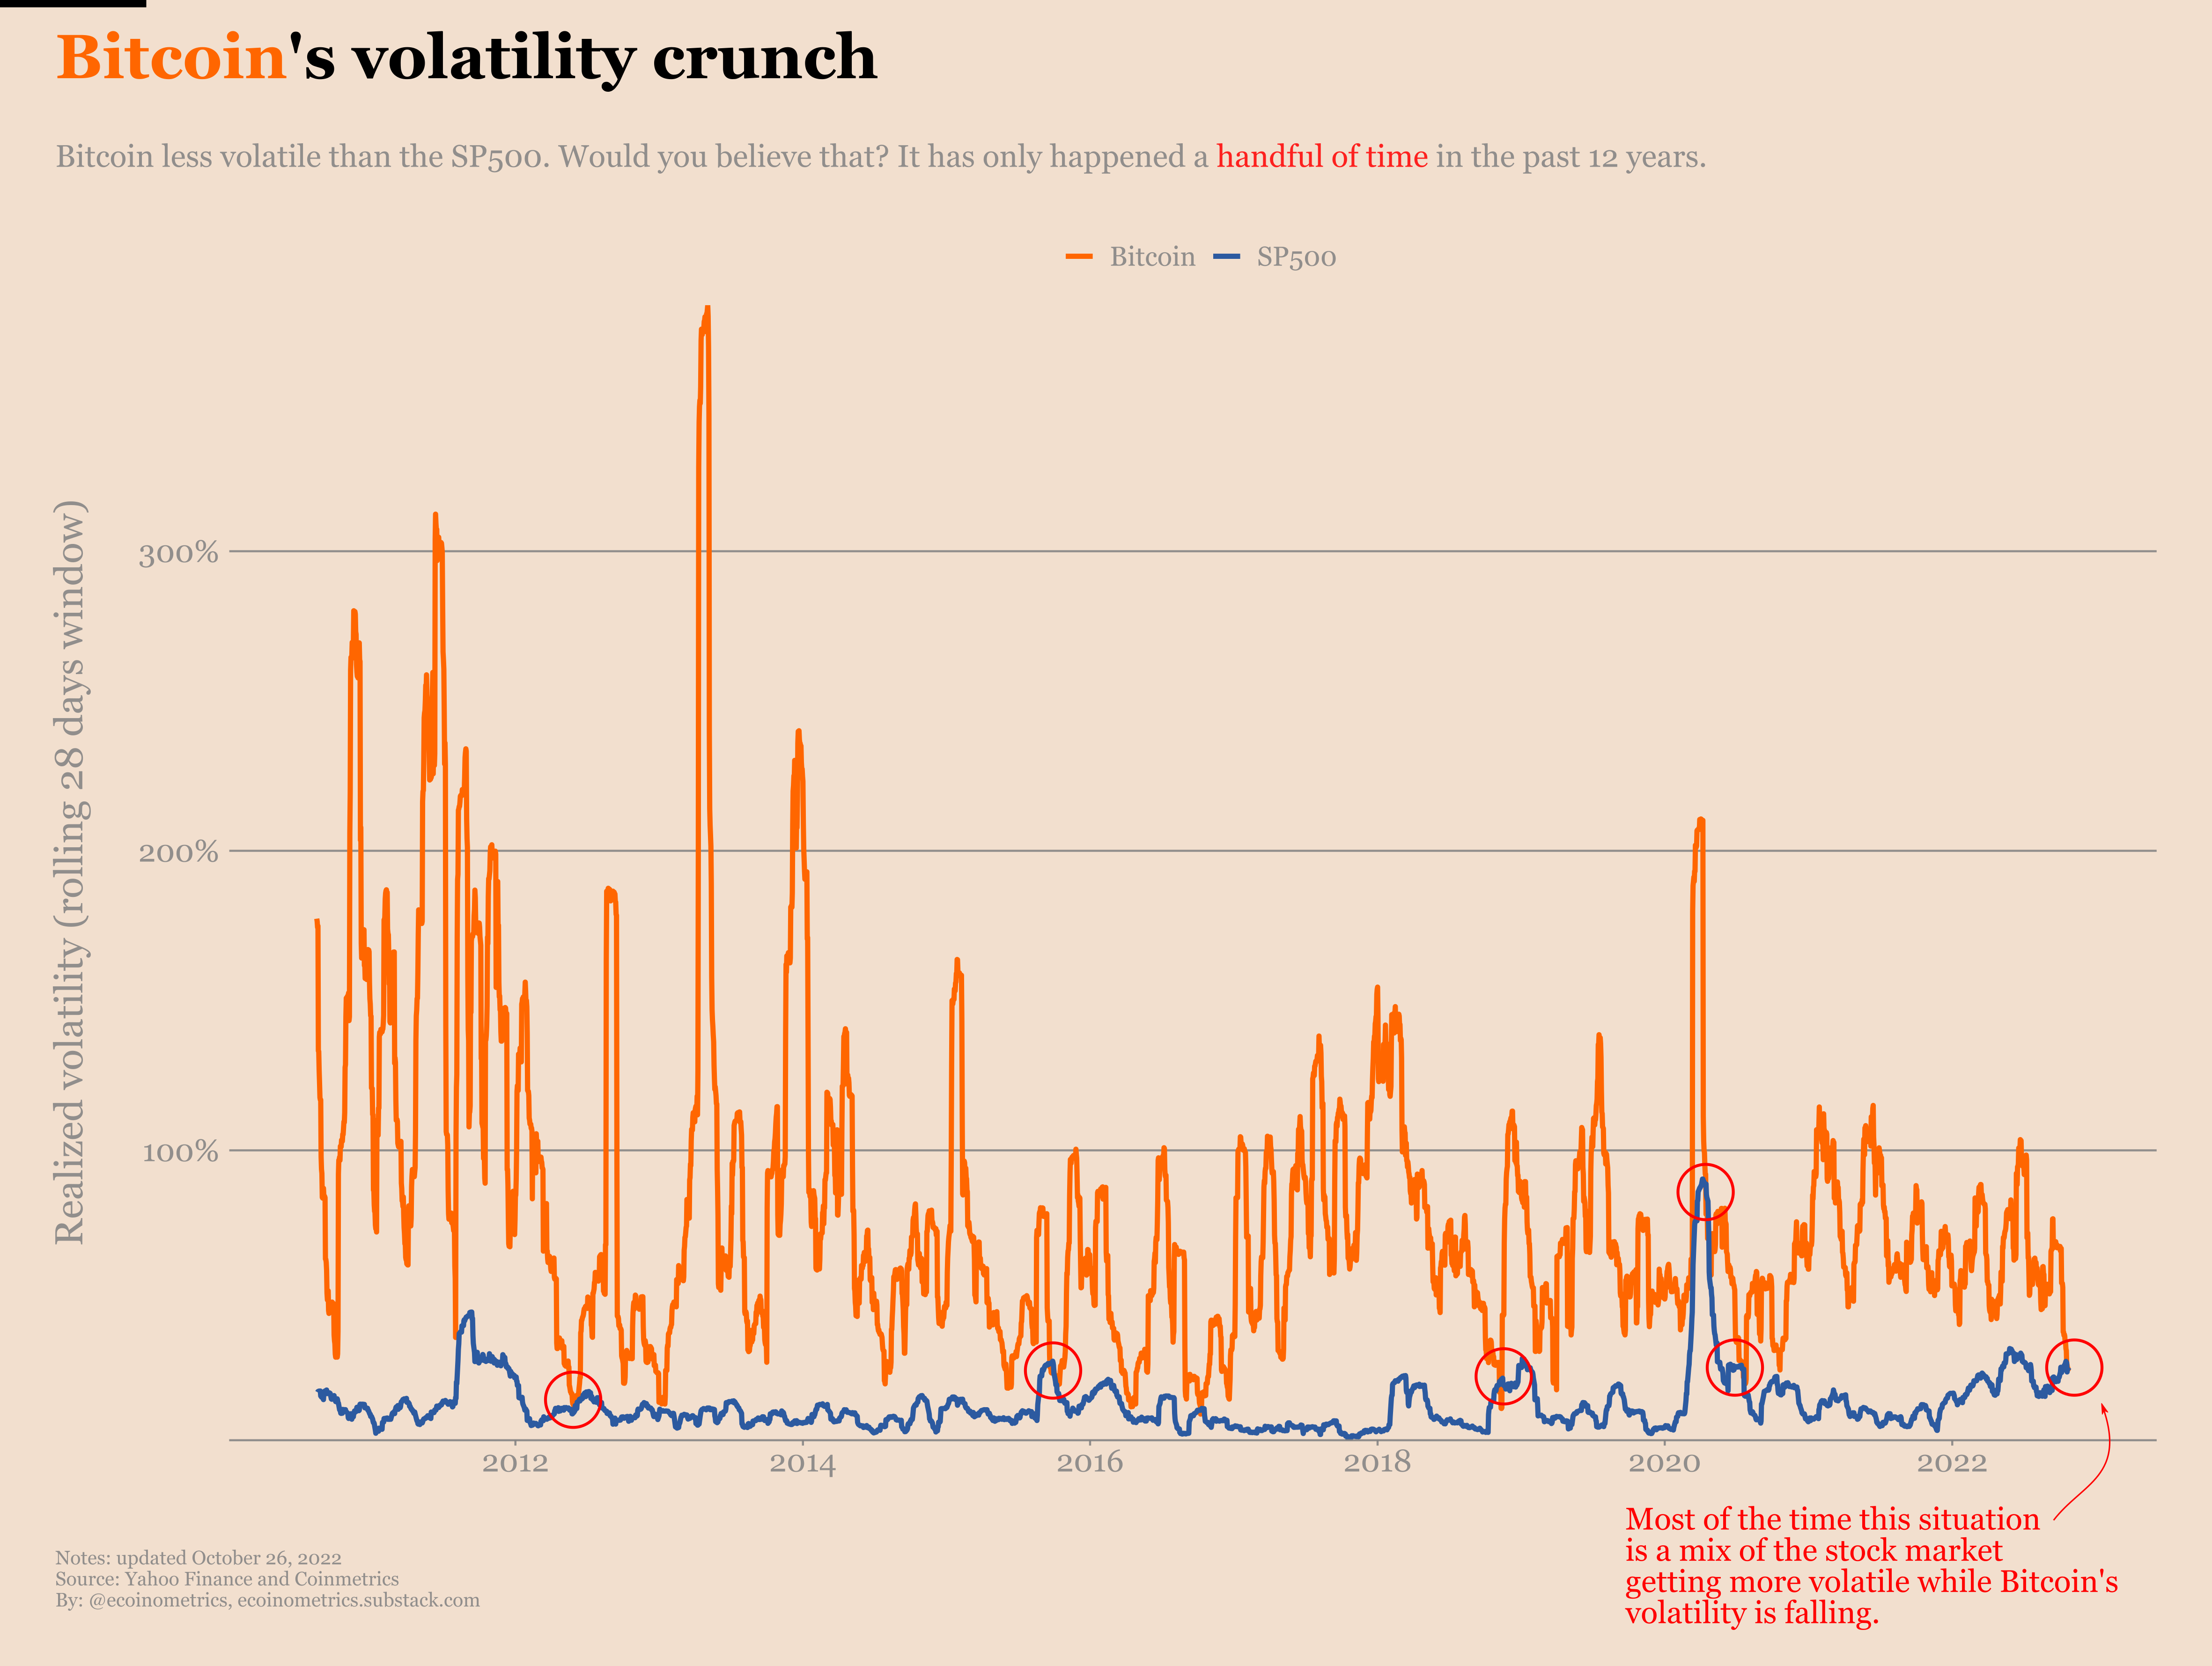 Bitcoin's volatility has gone lower than that of the S&P500 only six times